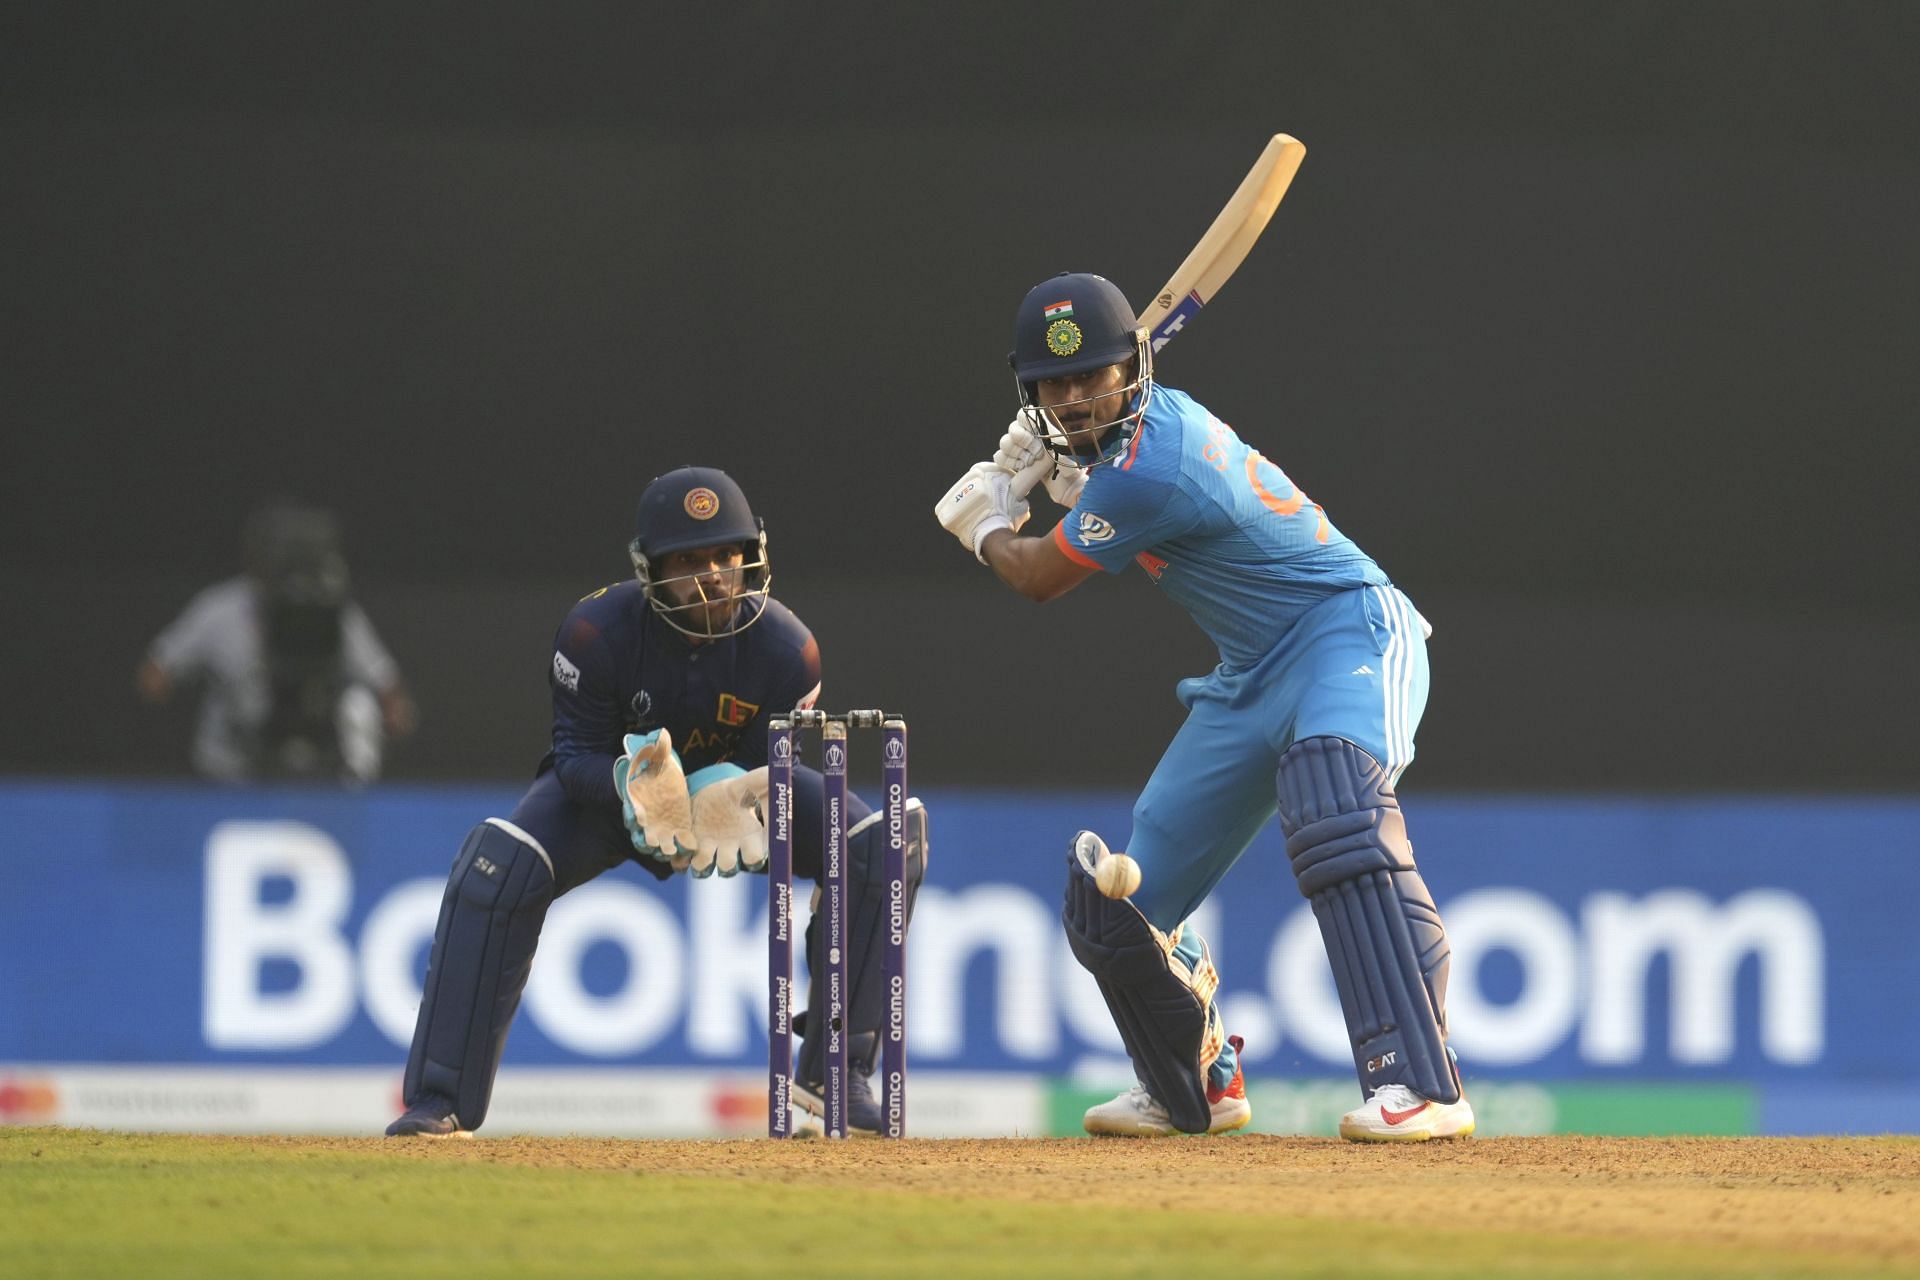 Shreyas Iyer struck three fours and six sixes during his innings. [P/C: AP]